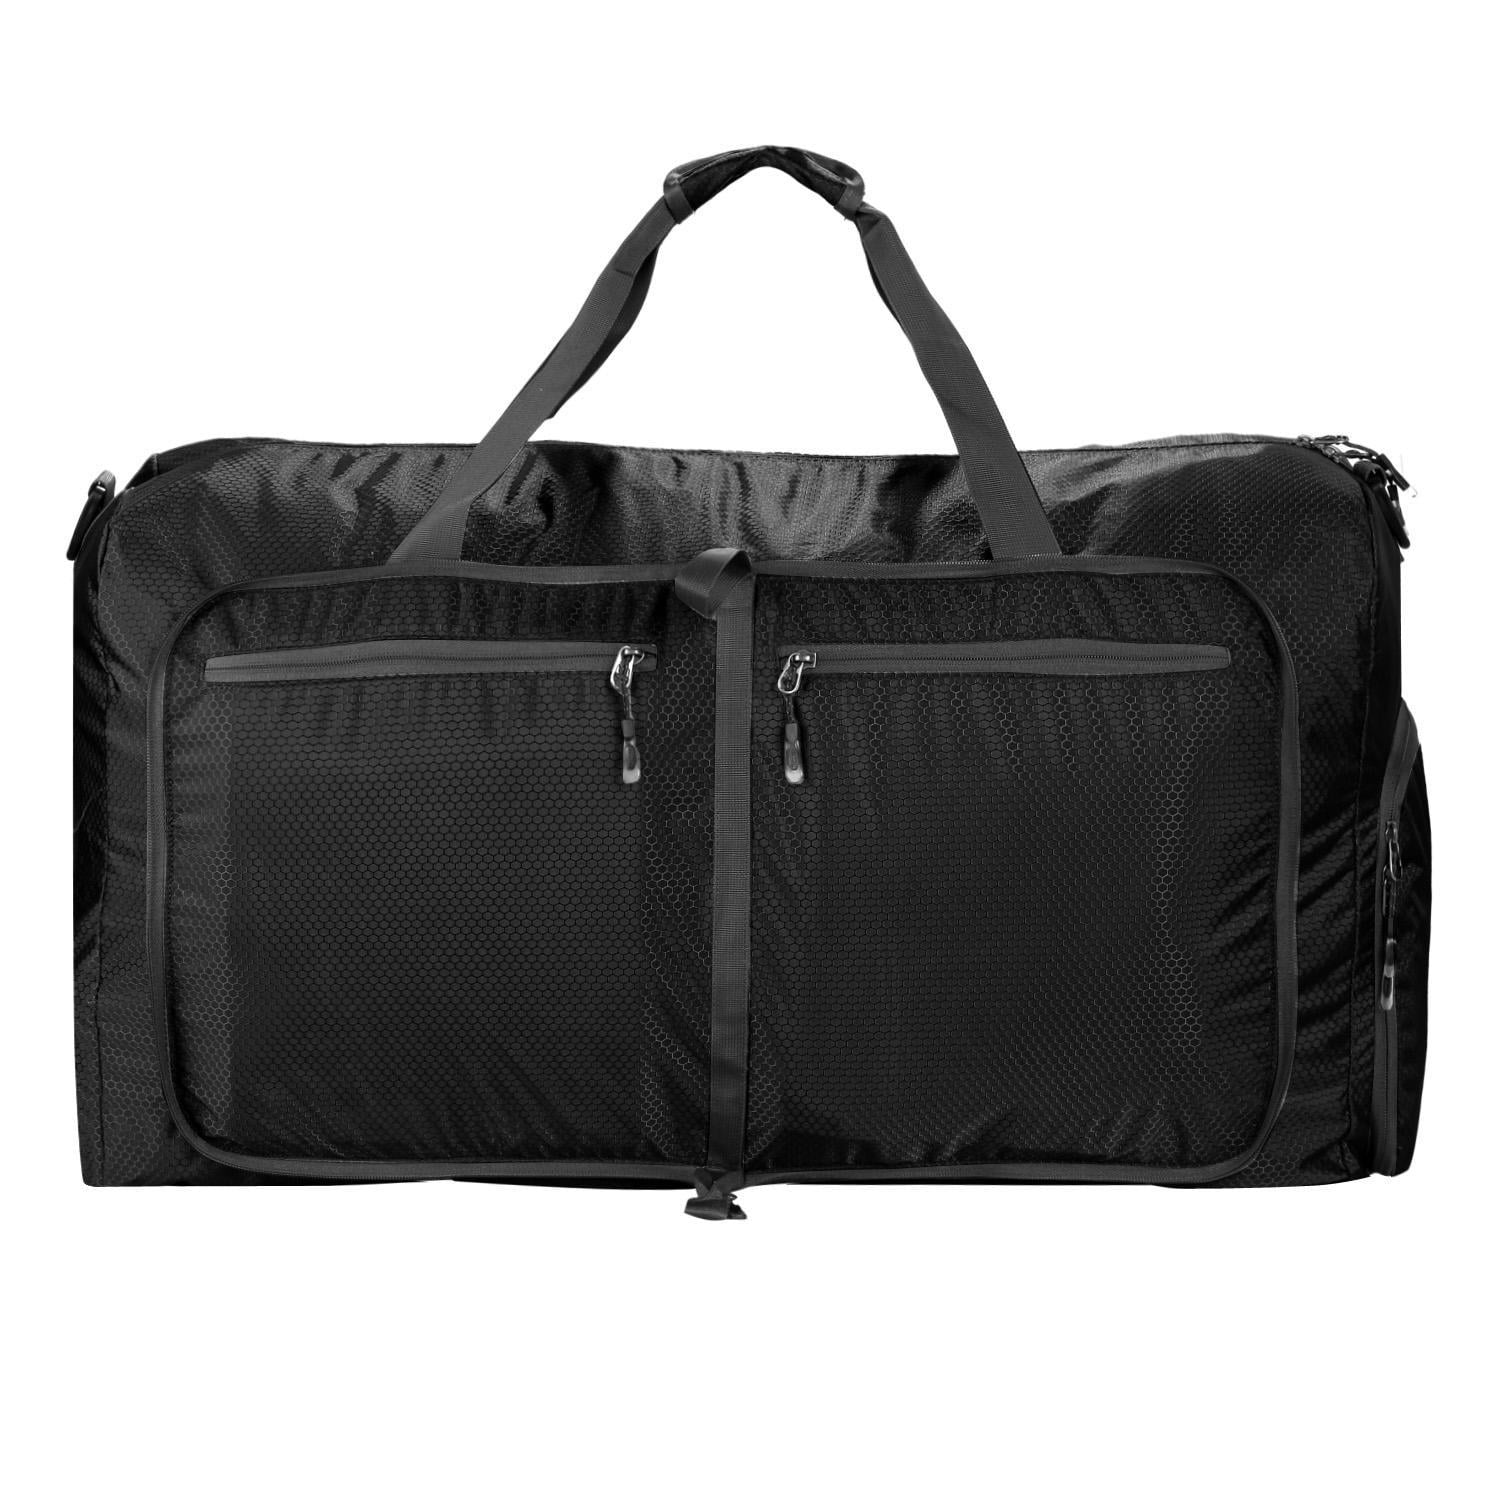 Large Duffel Bag, 80L Foldable Travel Holdall Duffle Bag Weekend Overnight Sport Bag with Shoes ...